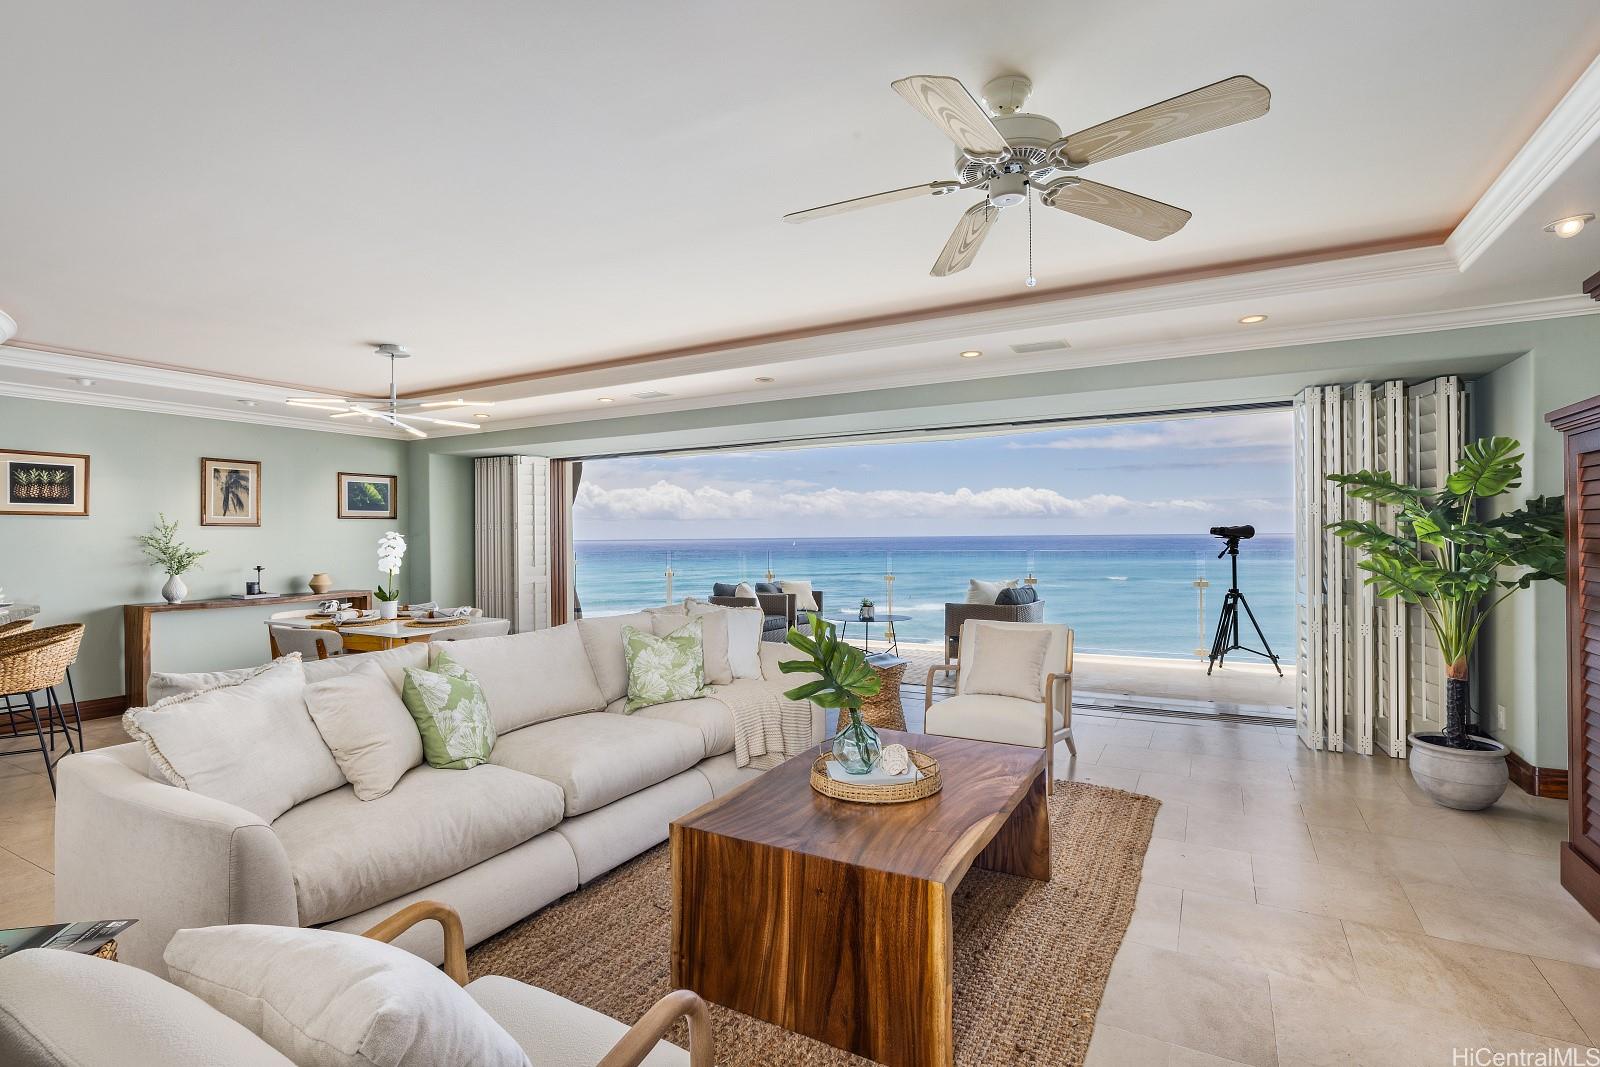 The serenity of the ocean welcomes you home as you step from the elevator into your living area